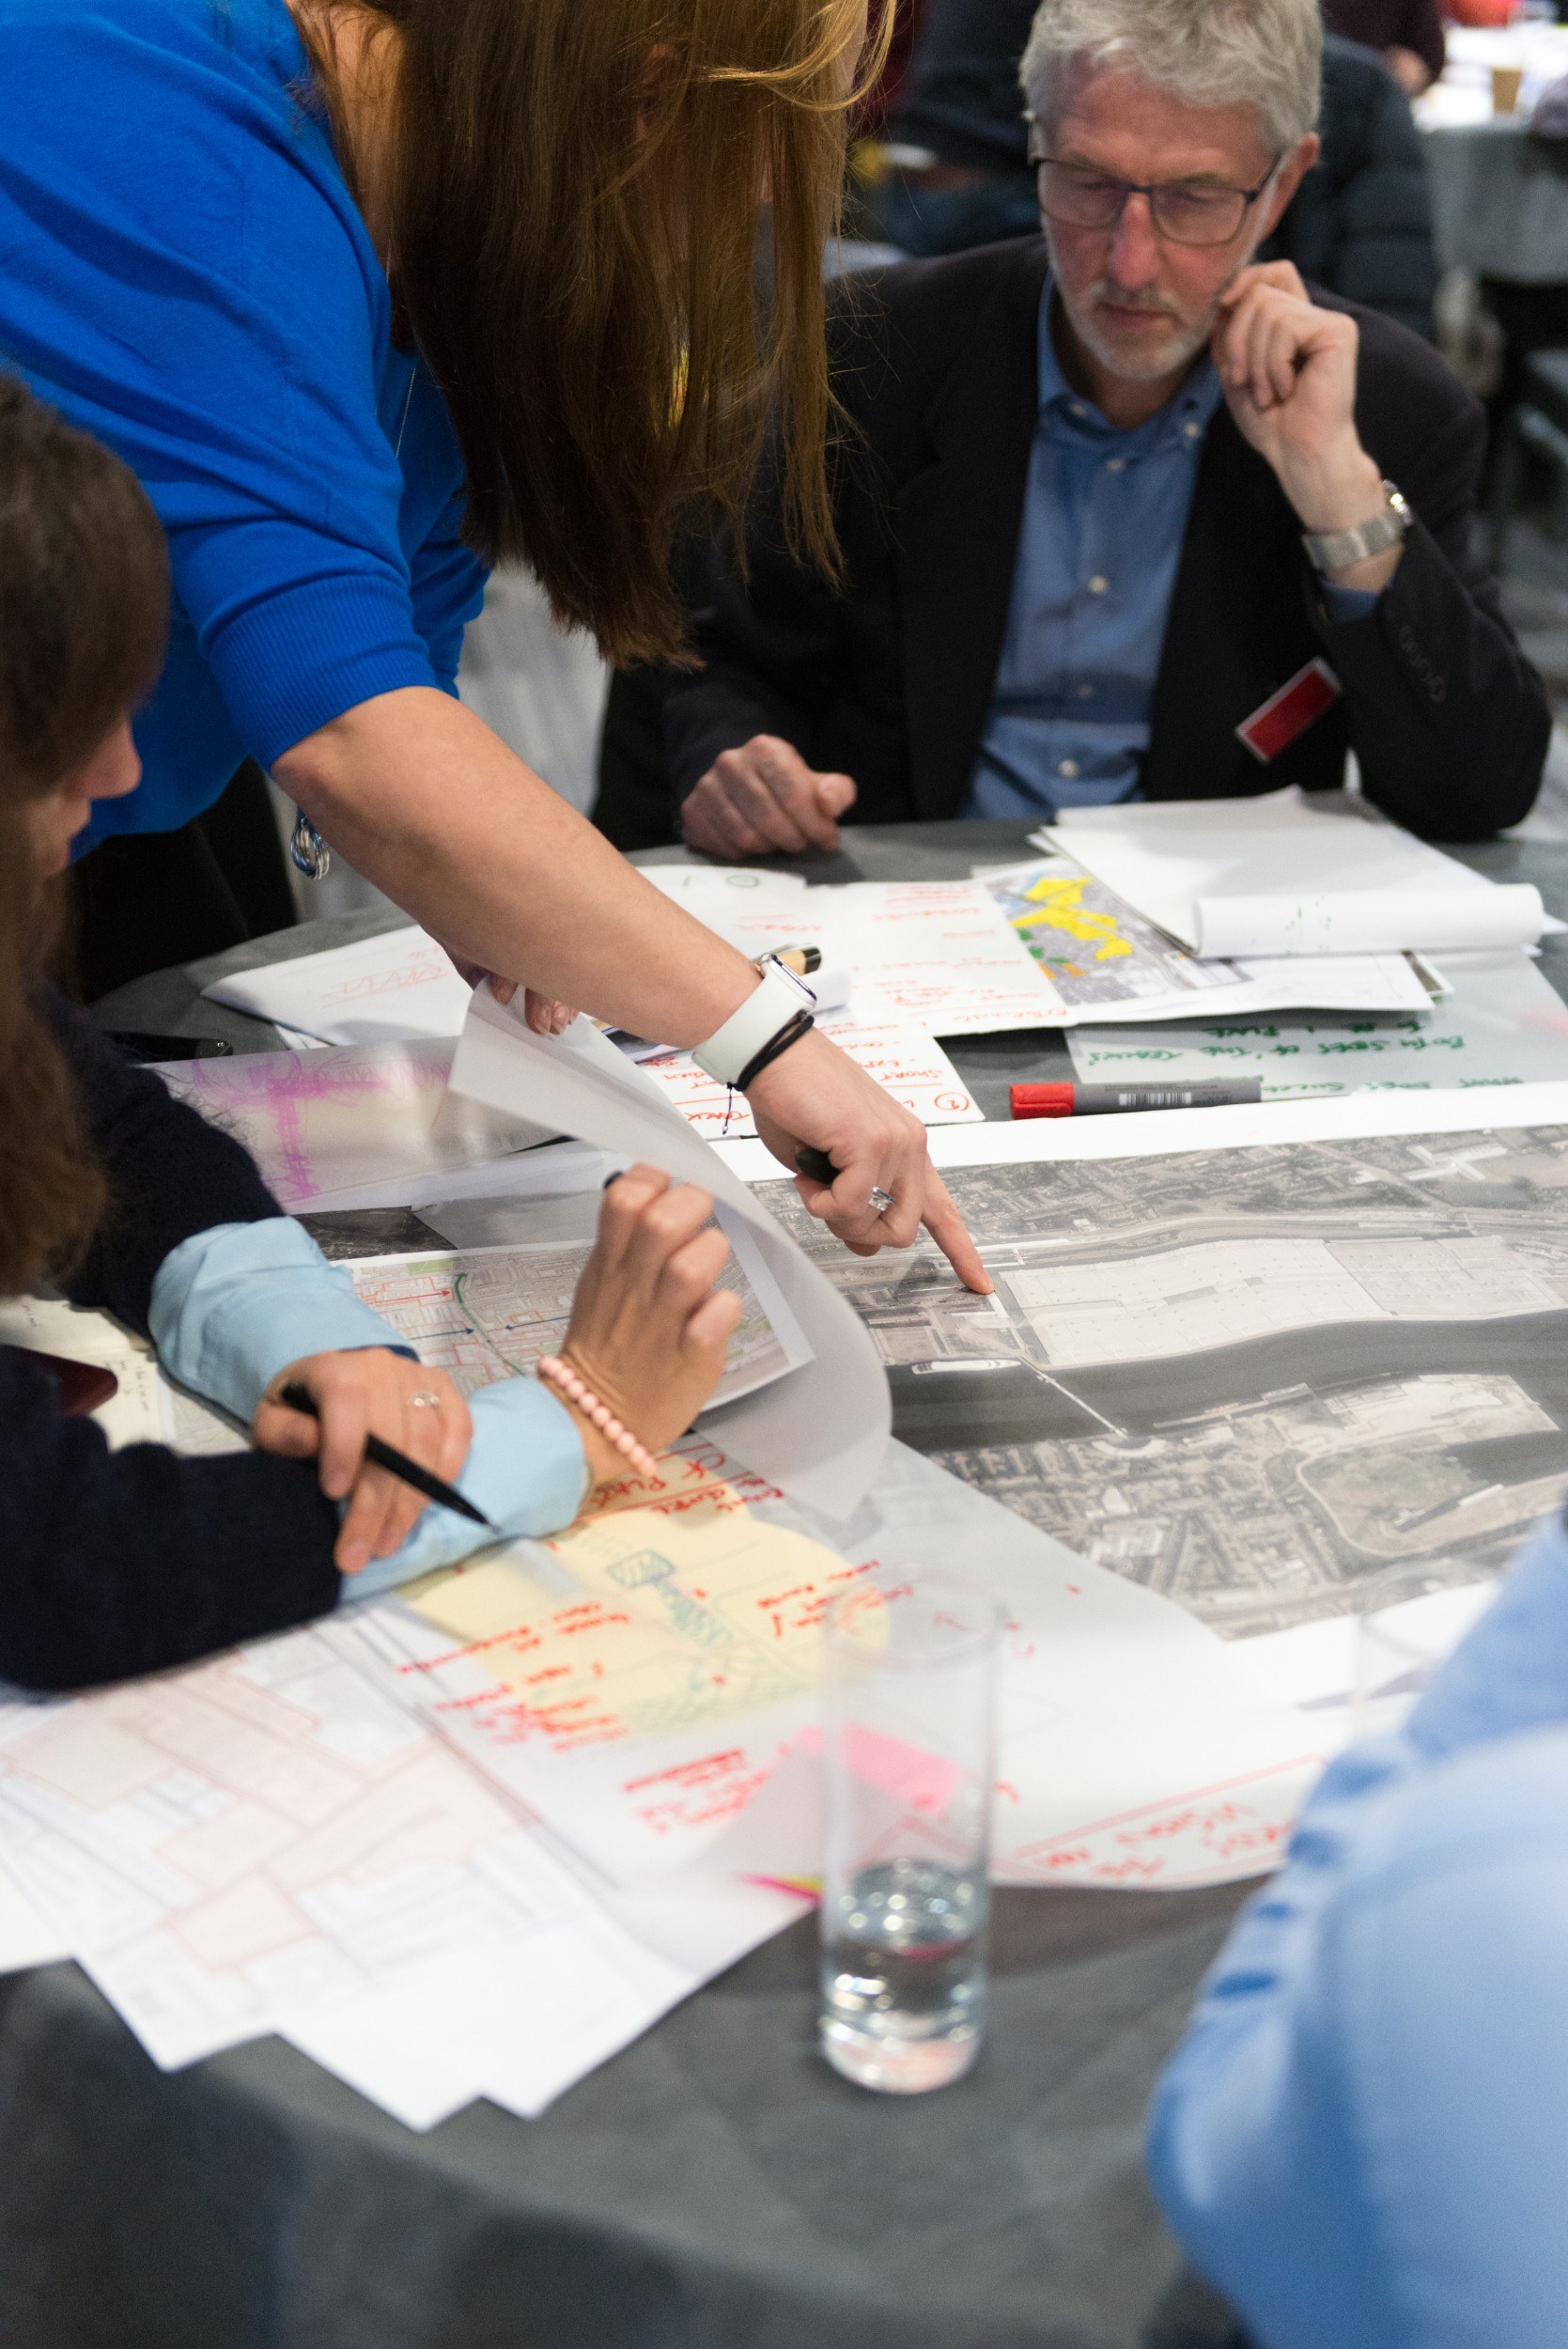 Hand pointing at a pile of maps and diagrams, with people sitting around a table